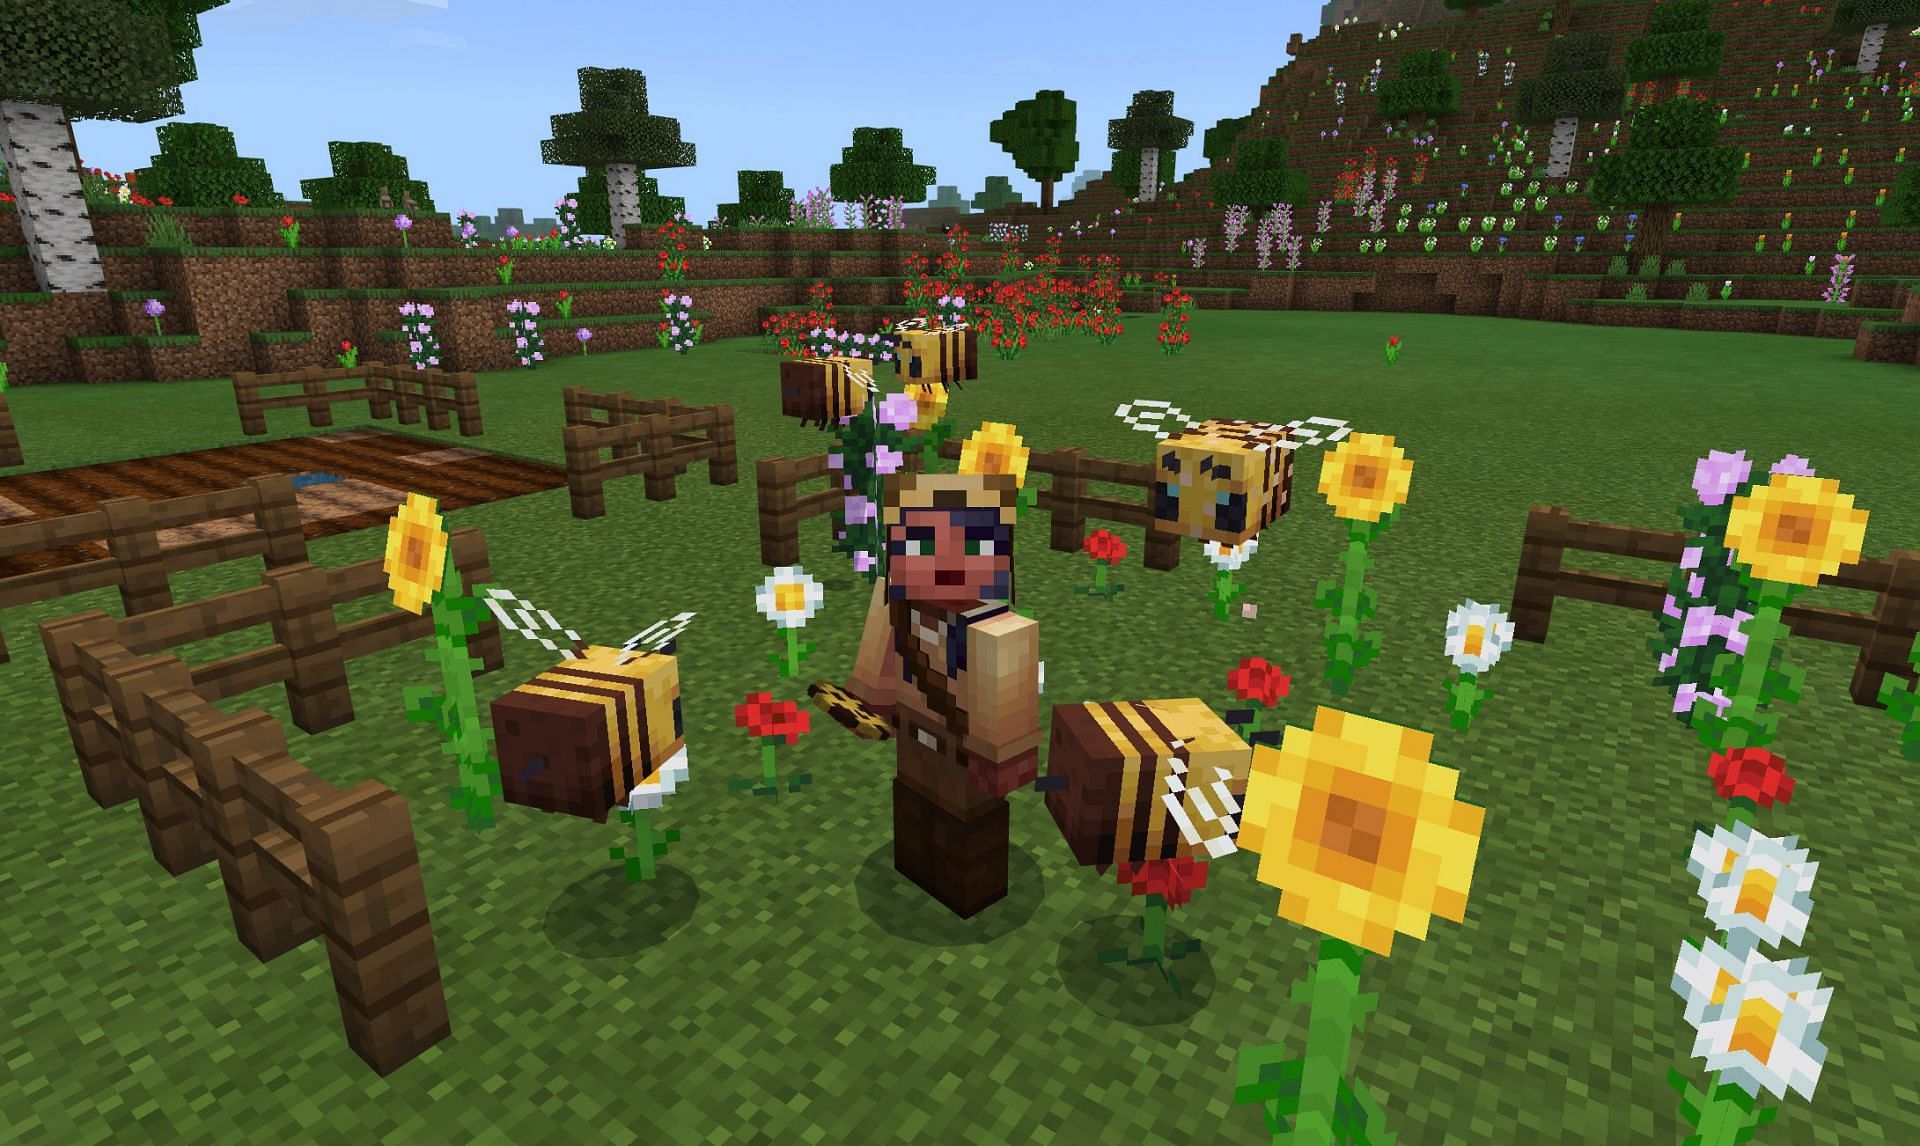 Bees can help pollinate crops and speed their growth (Image via Mojang)